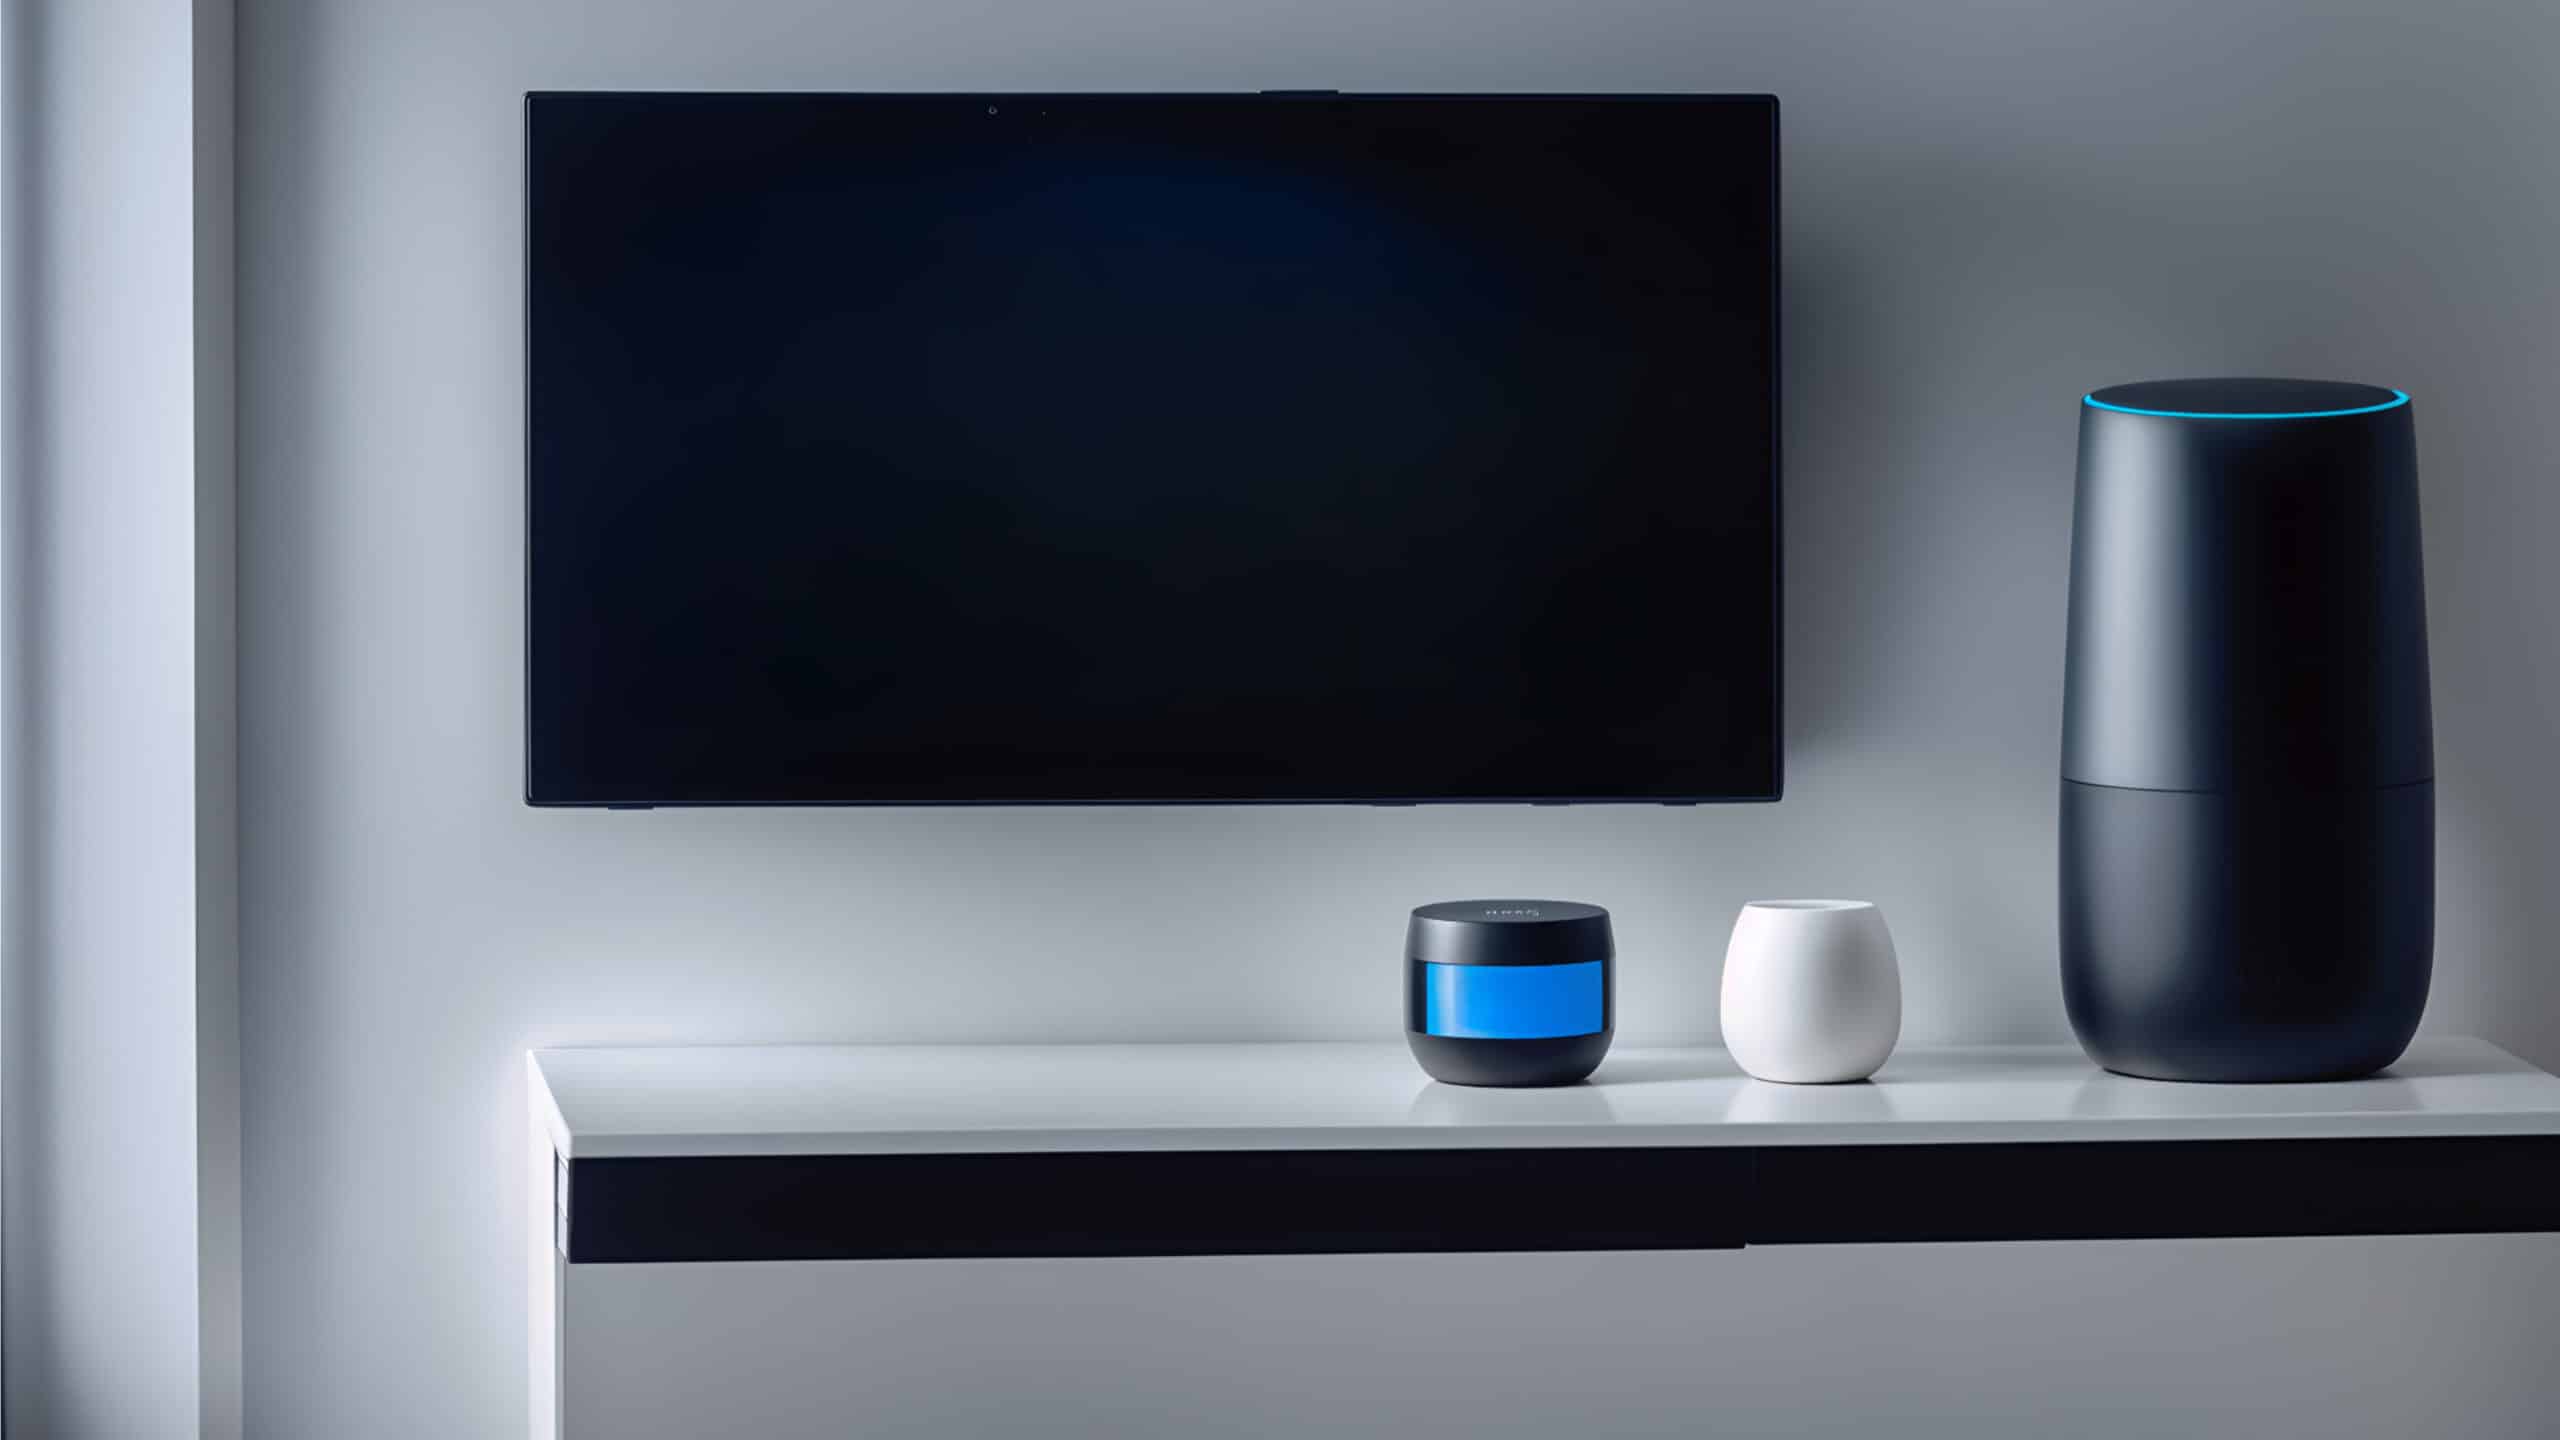 www.appr.com : How To Connect Alexa To Smart TV?